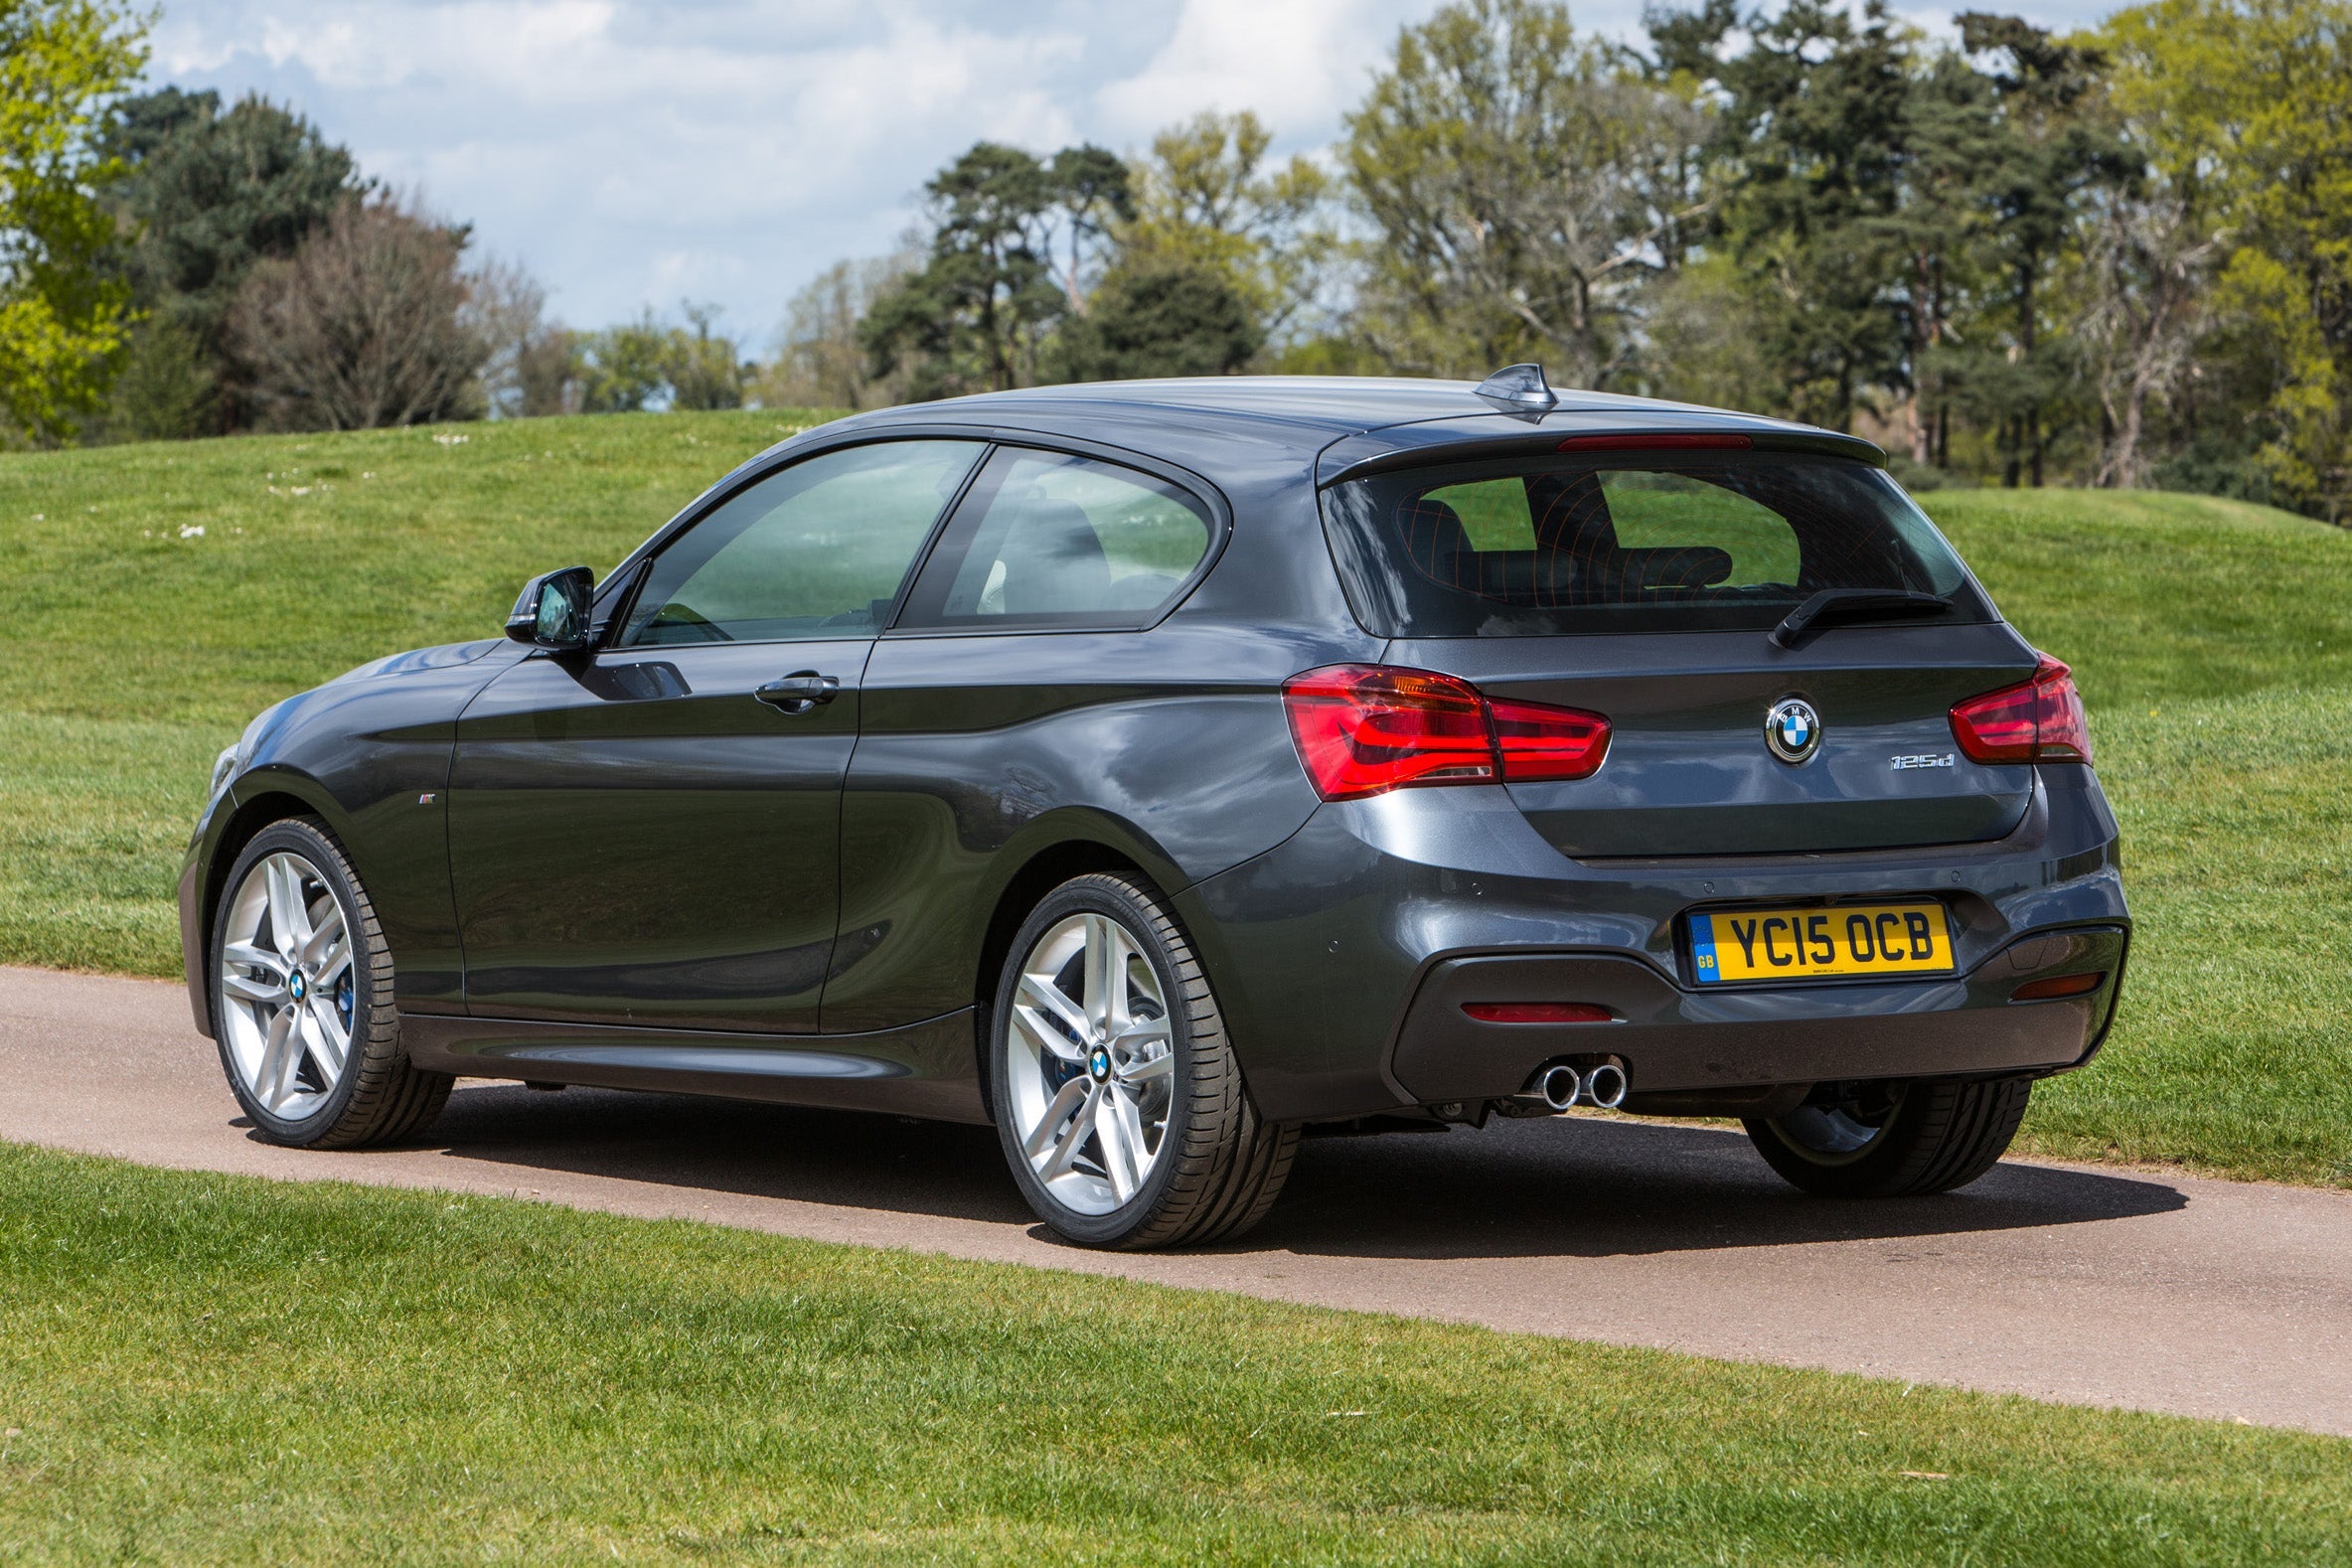 BMW 1 Series (2011-2019) Review